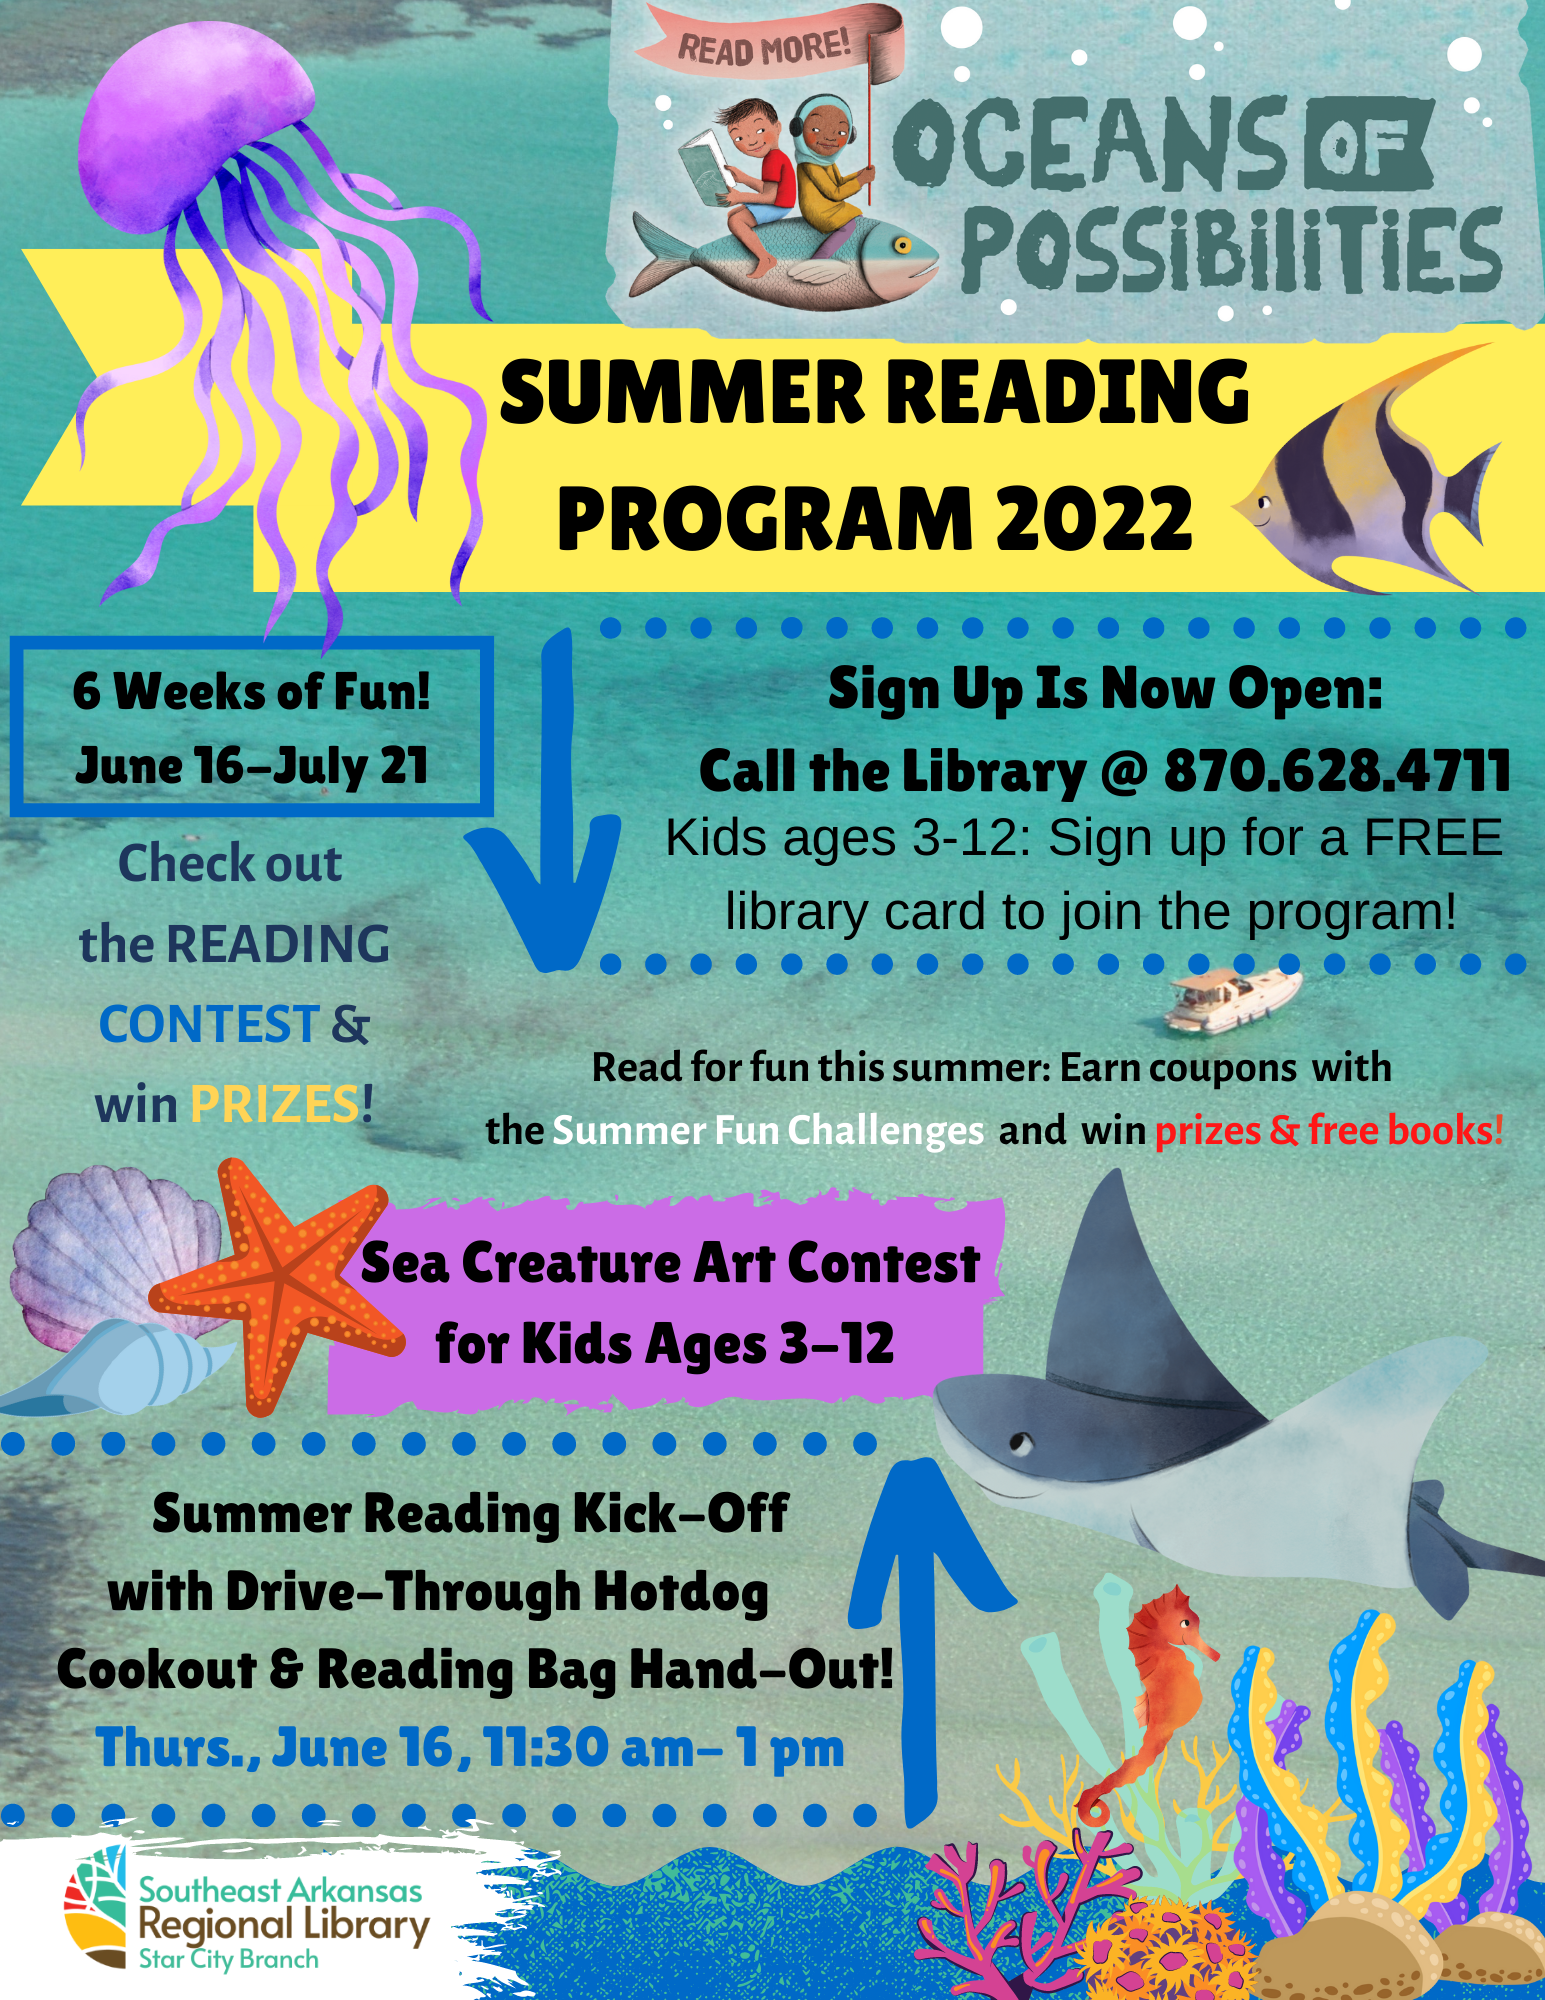 Informational flyer with Summer Reading details as advertisement.